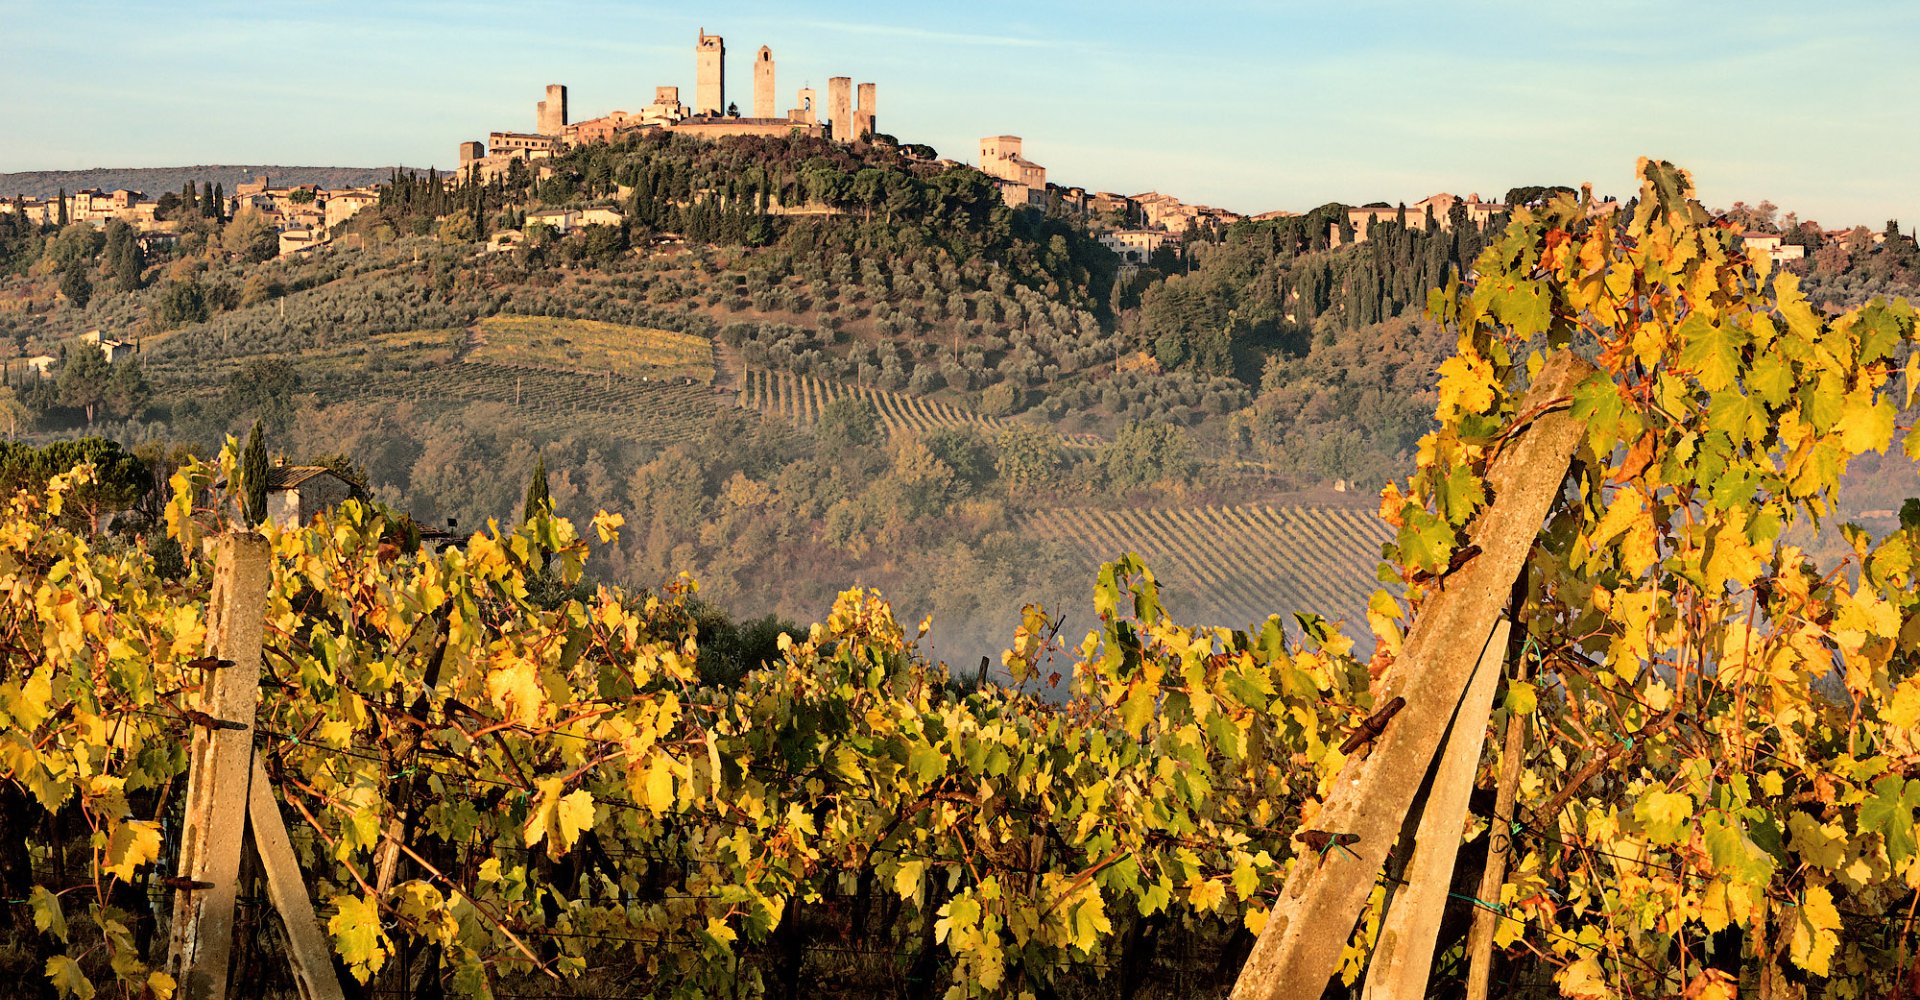 Towers of San Gimignano and vineyards